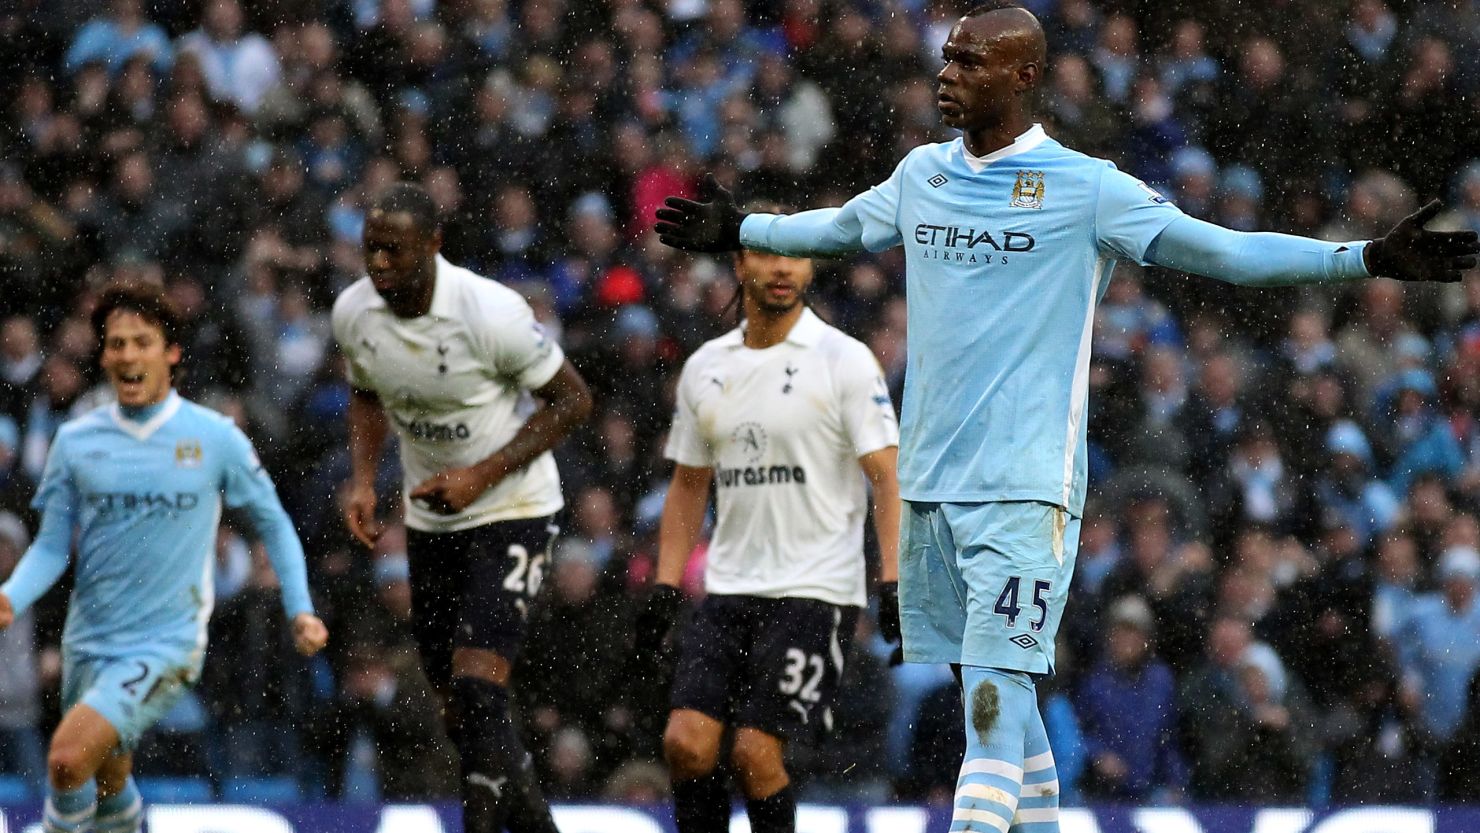 Manchester City's Mario Balotelli celebrates his winning penalty soon after he appeared to kick out at an opponent.